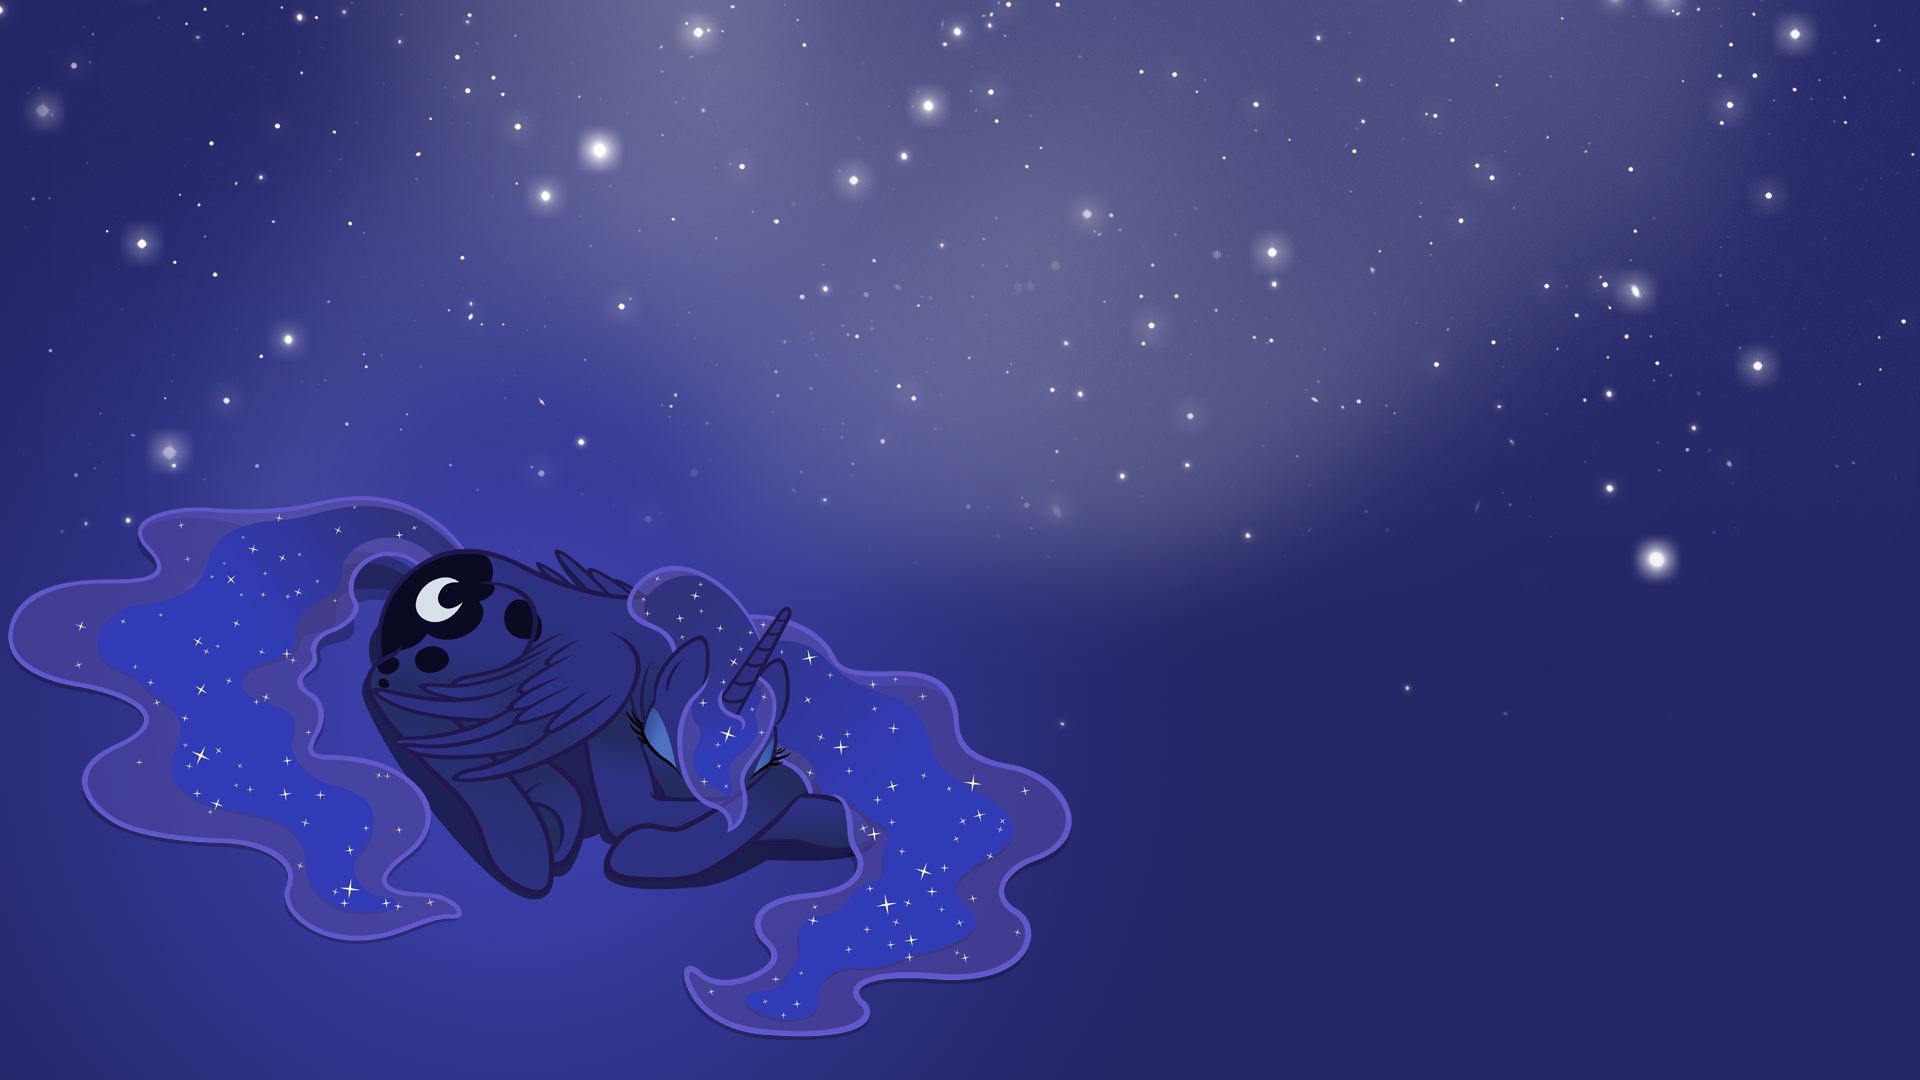 Sleepy Luna Wallpaper by owlet57 and Shachza